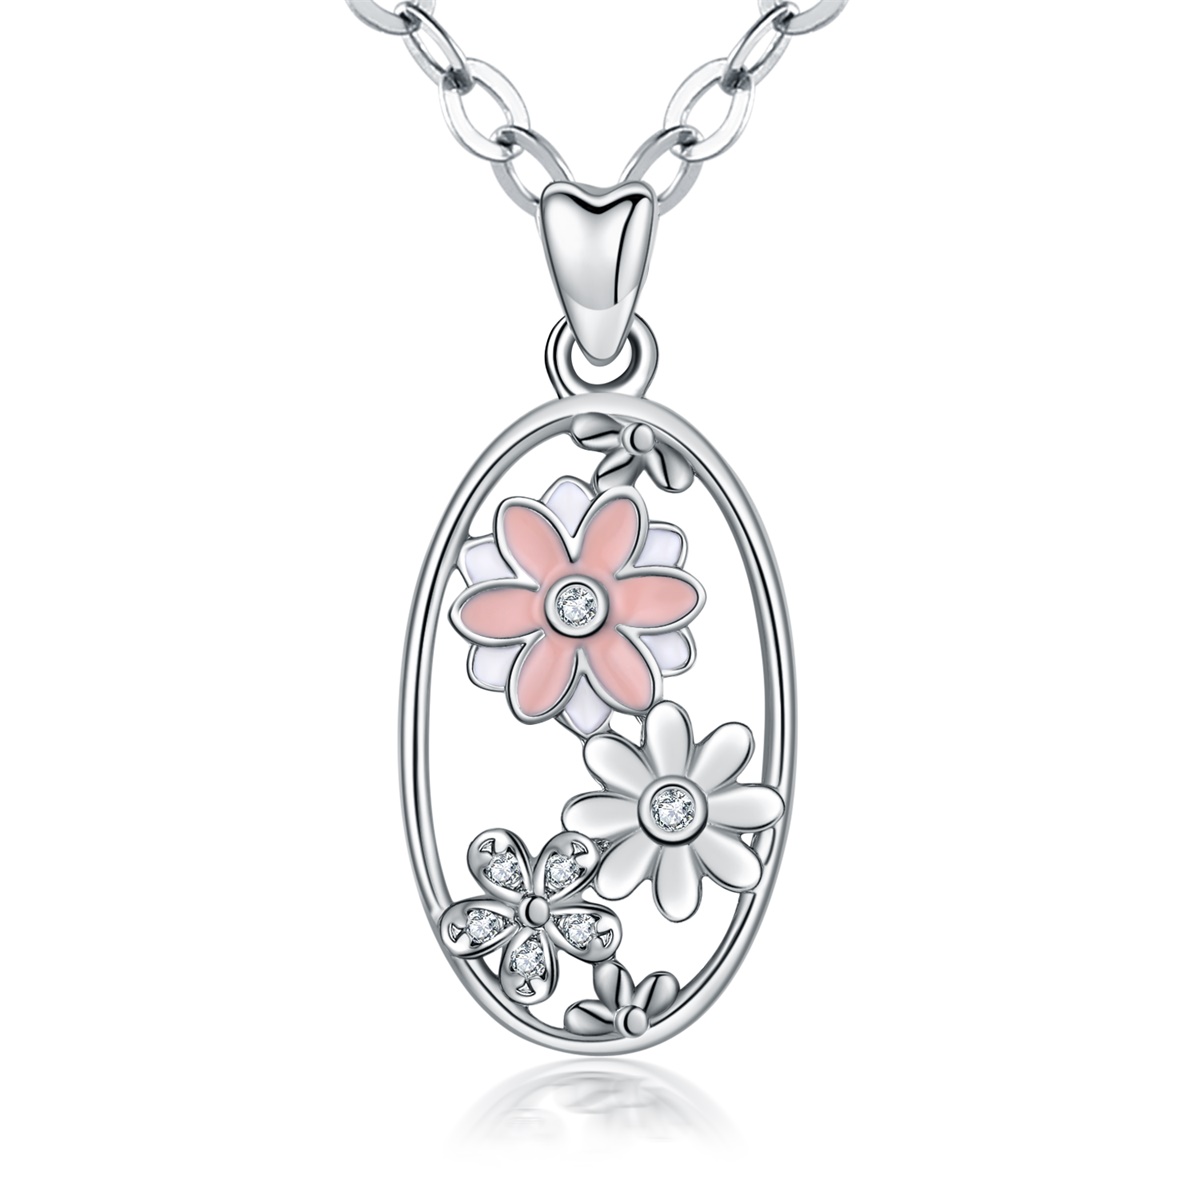 Merryshine Jewelry Rhodium Plated Oval Frame Pink Color Flower Jewelry Girl Friendship Necklace